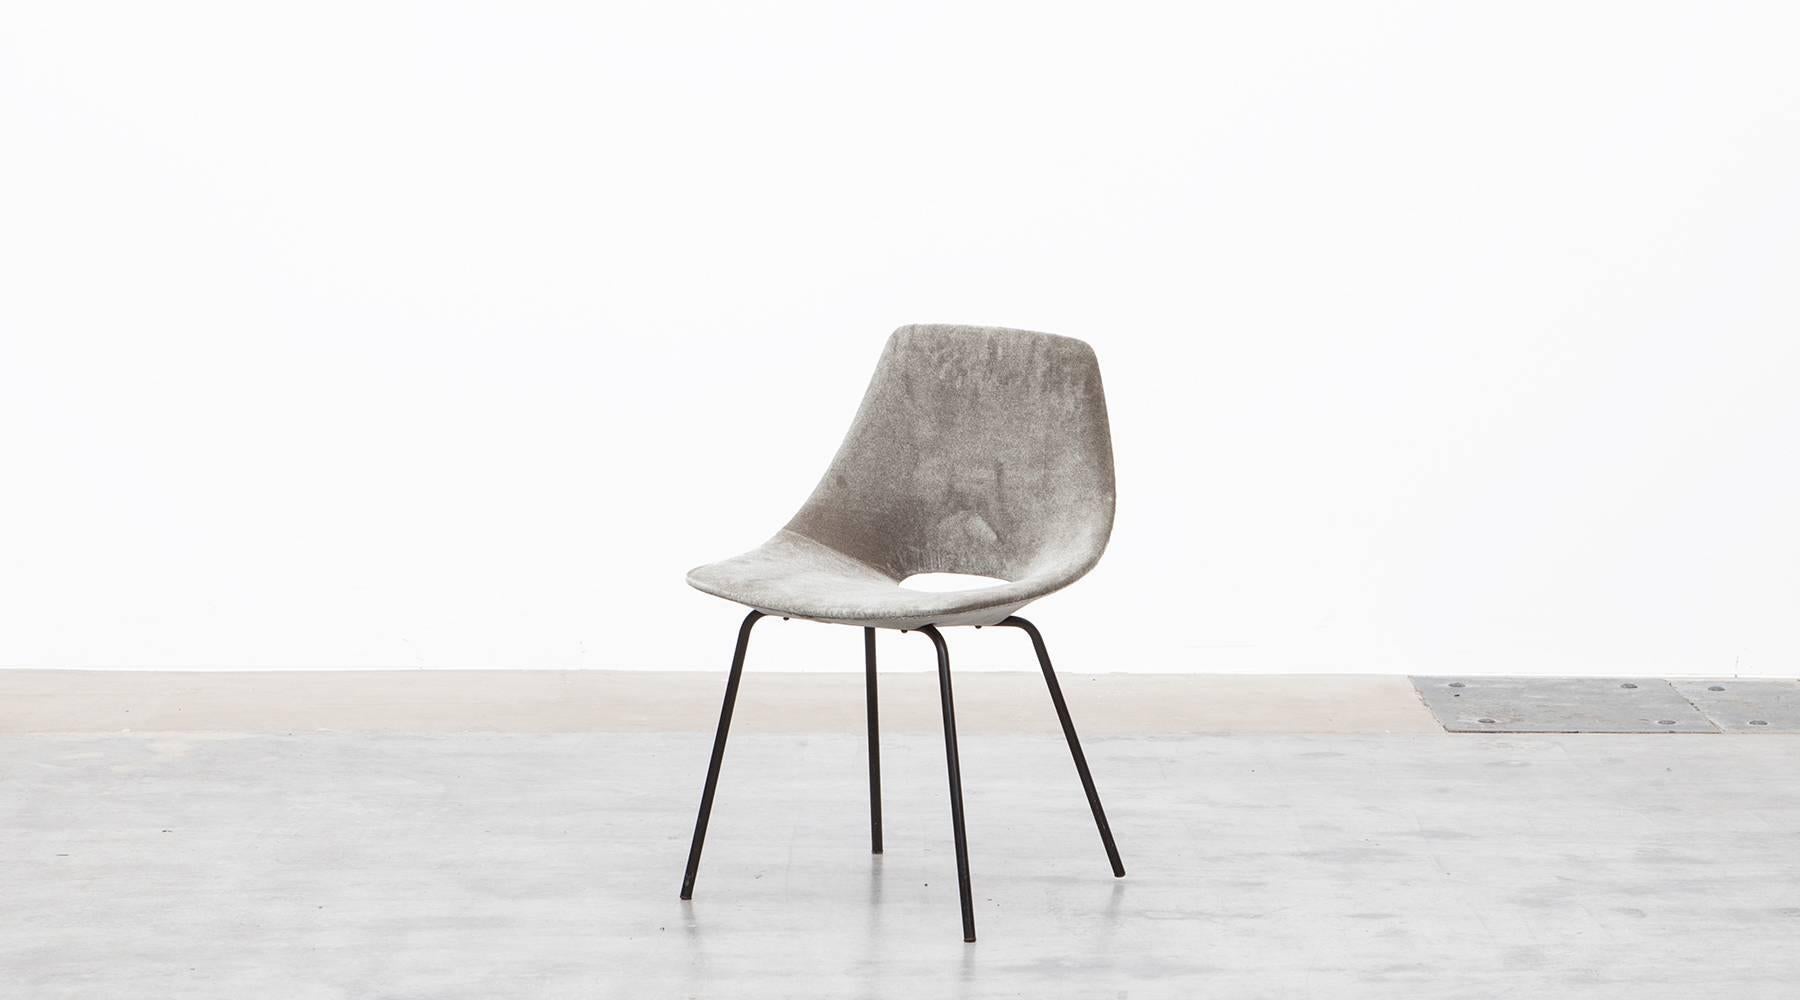 Set of six molded plywood chairs by French designer Pierre Guariche are newly upholstered in warm gray high-quality fabric with black lacquered metal legs. The chairs are from 1954 and manufactured by Steiner.

Guariche was an innovative french